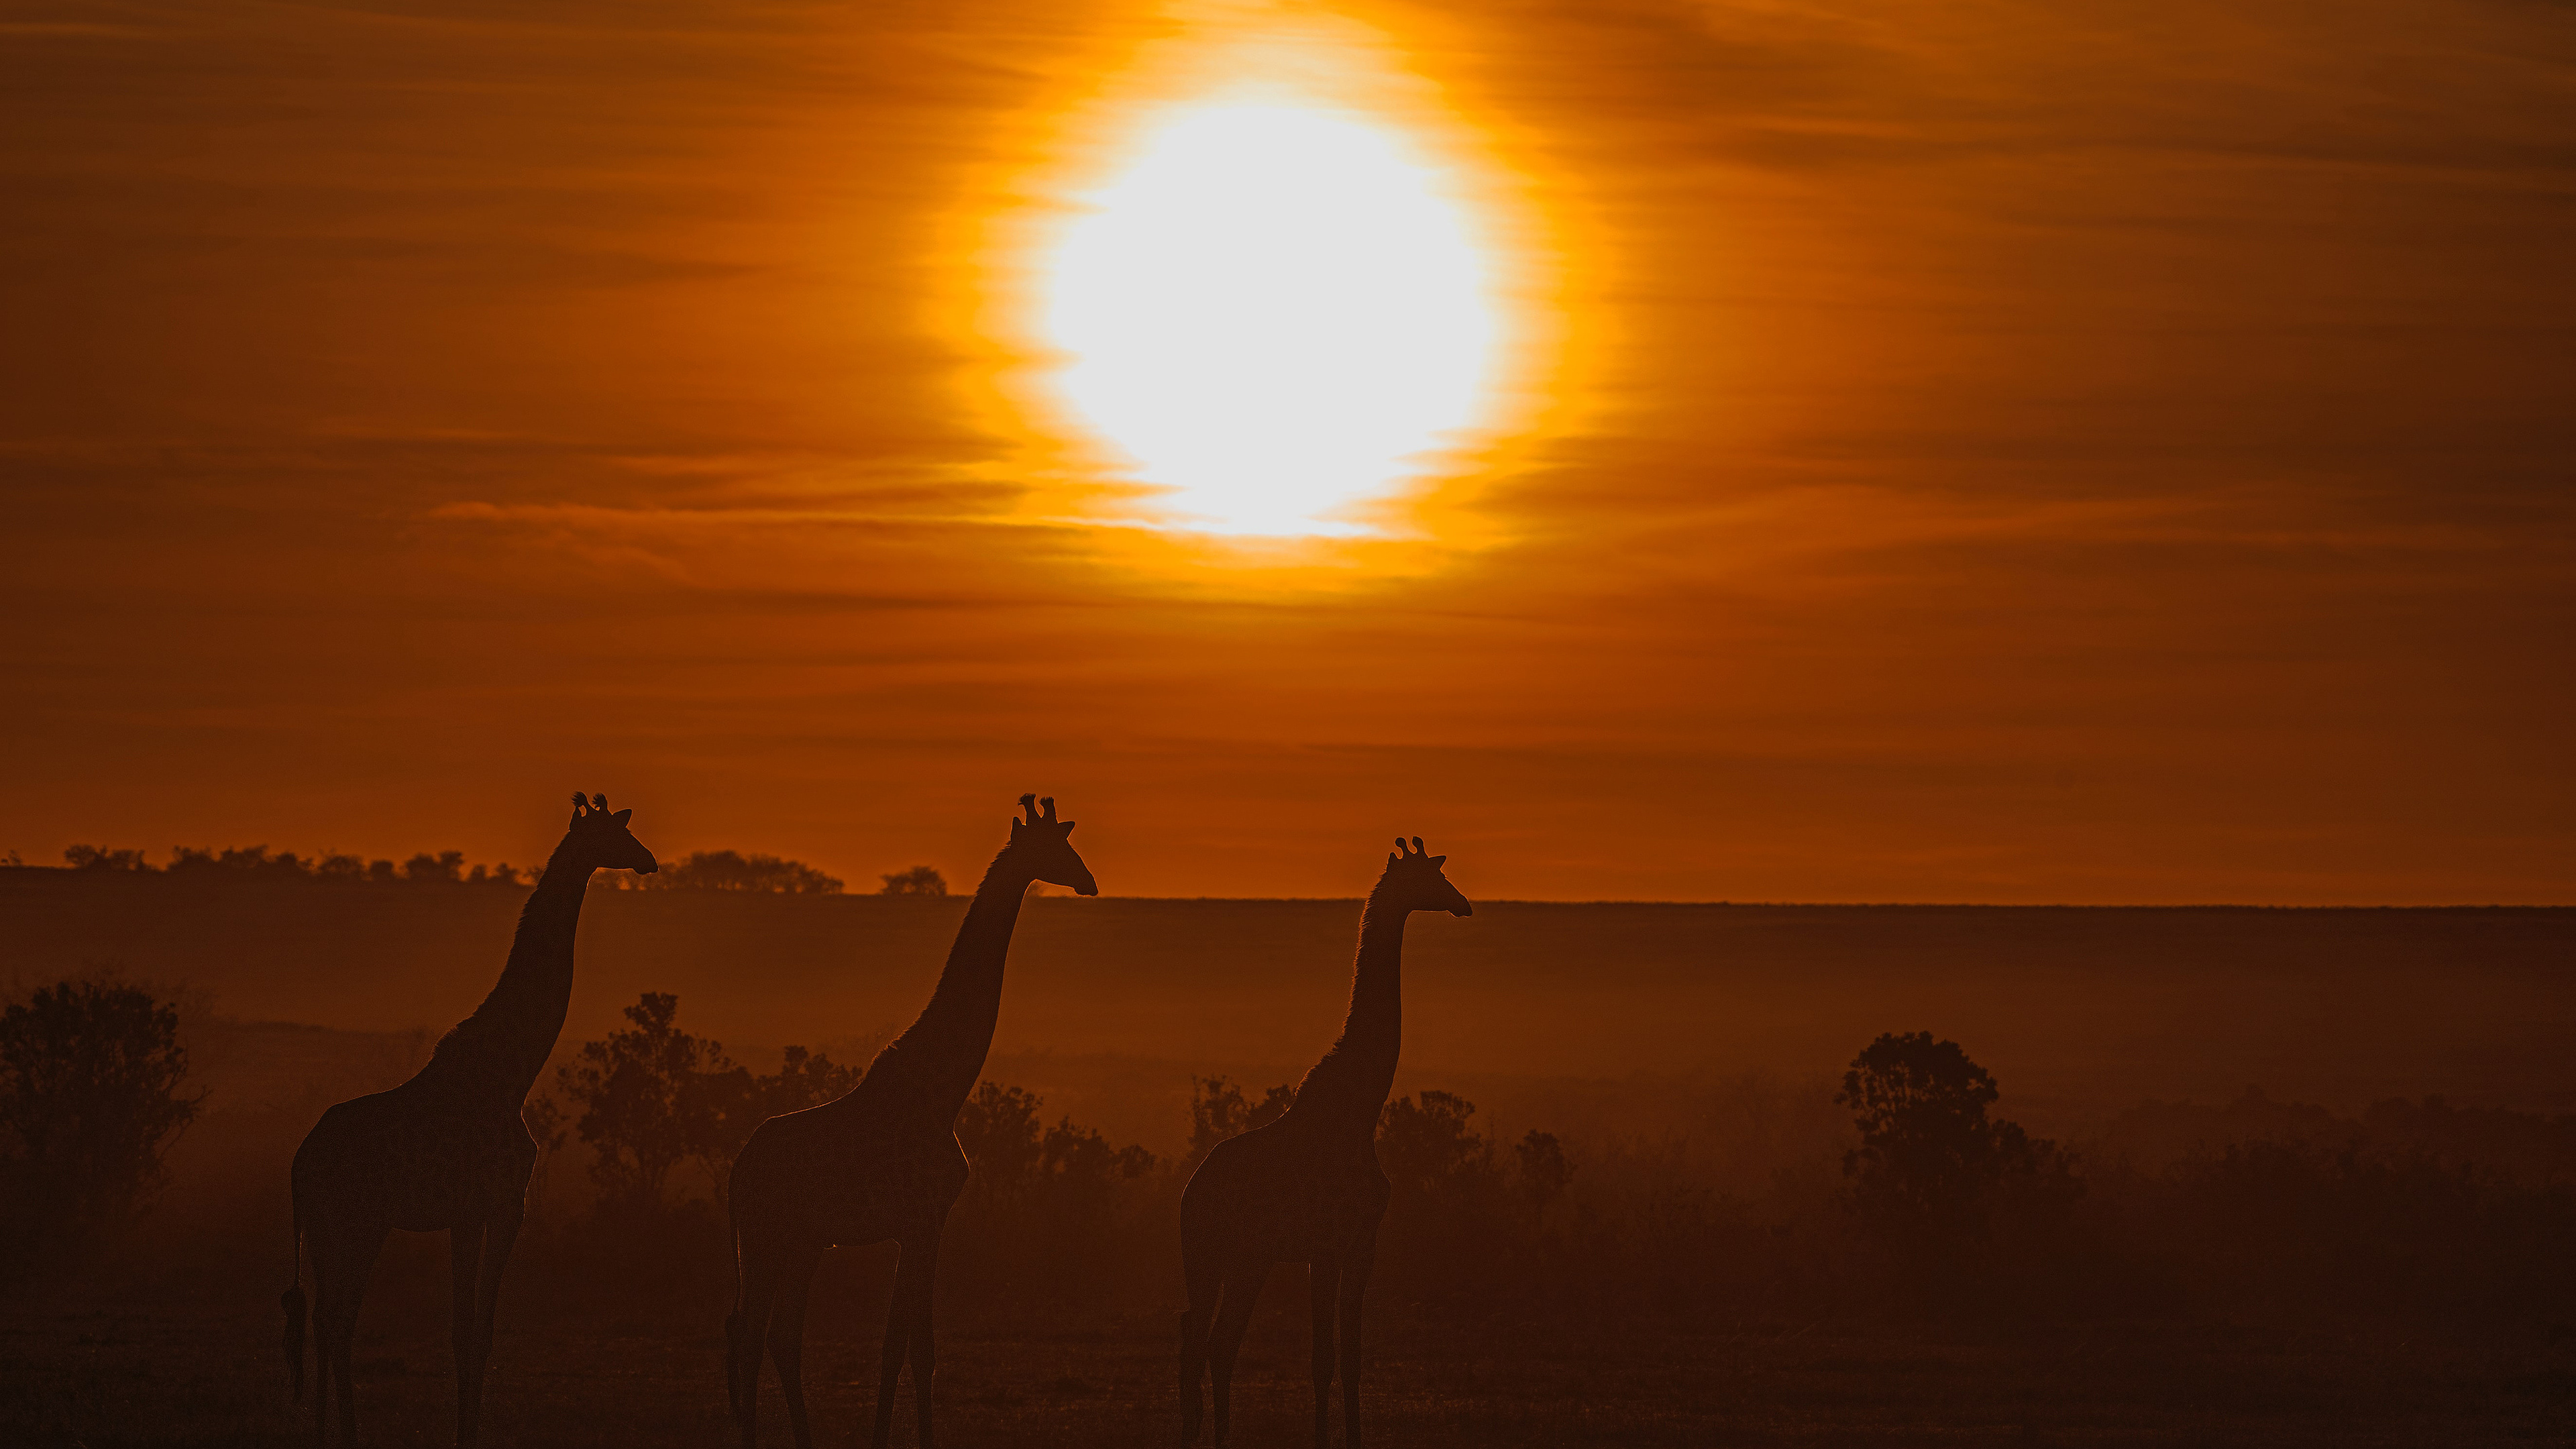 Giraffe: Silhouette, Animals with extremely long necks and legs. 3840x2160 4K Wallpaper.